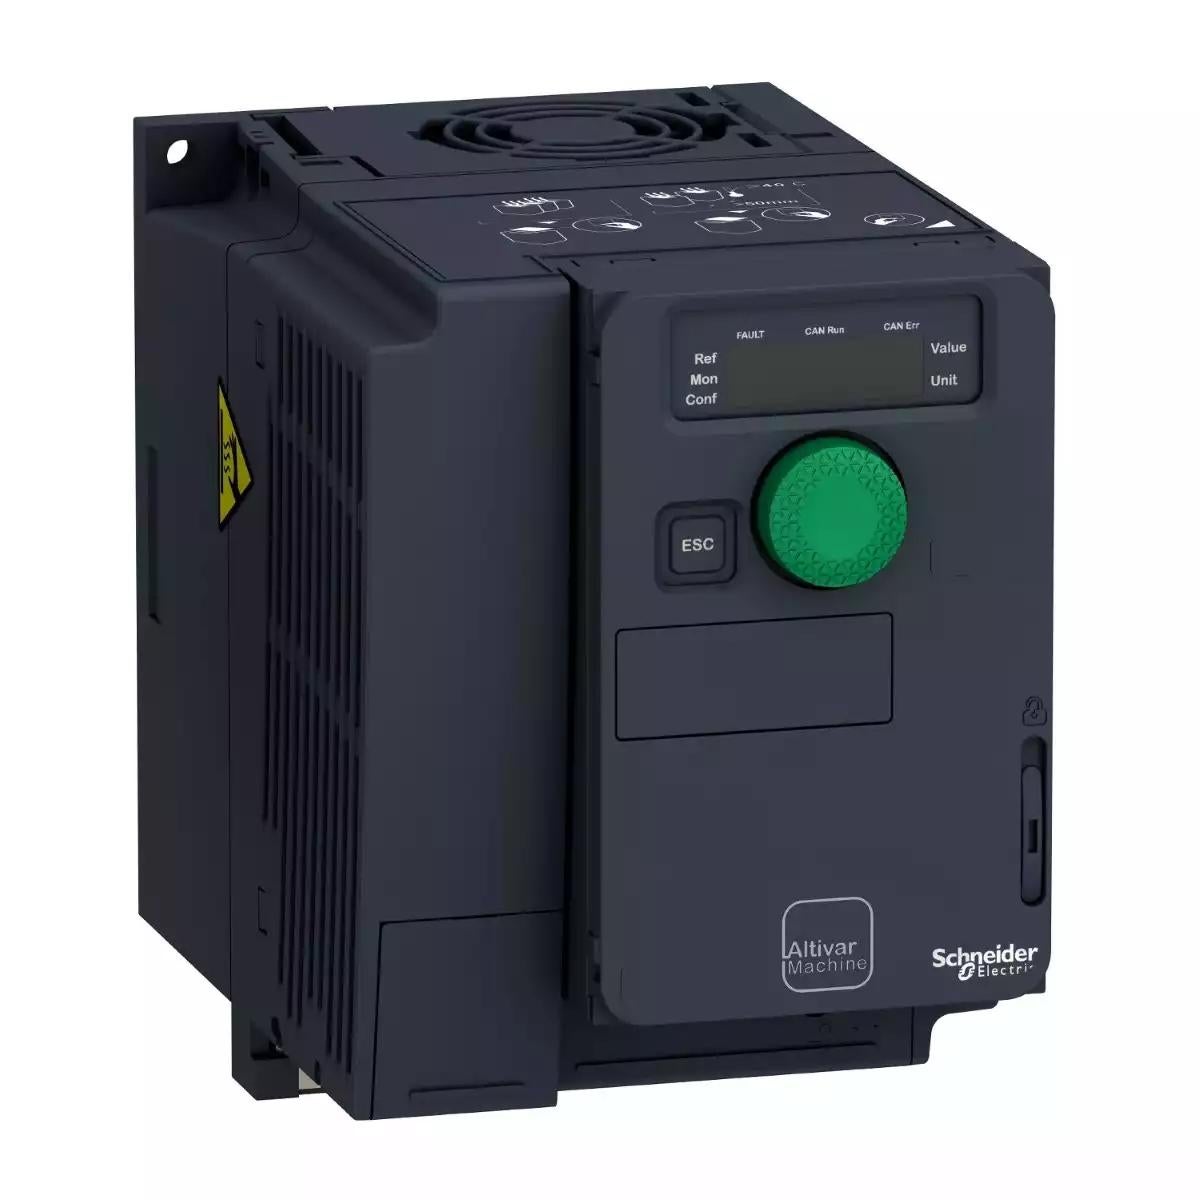 variable speed drive, Altivar Machine ATV320, 1.1kW, 200 to 240V, 1 phase, compact